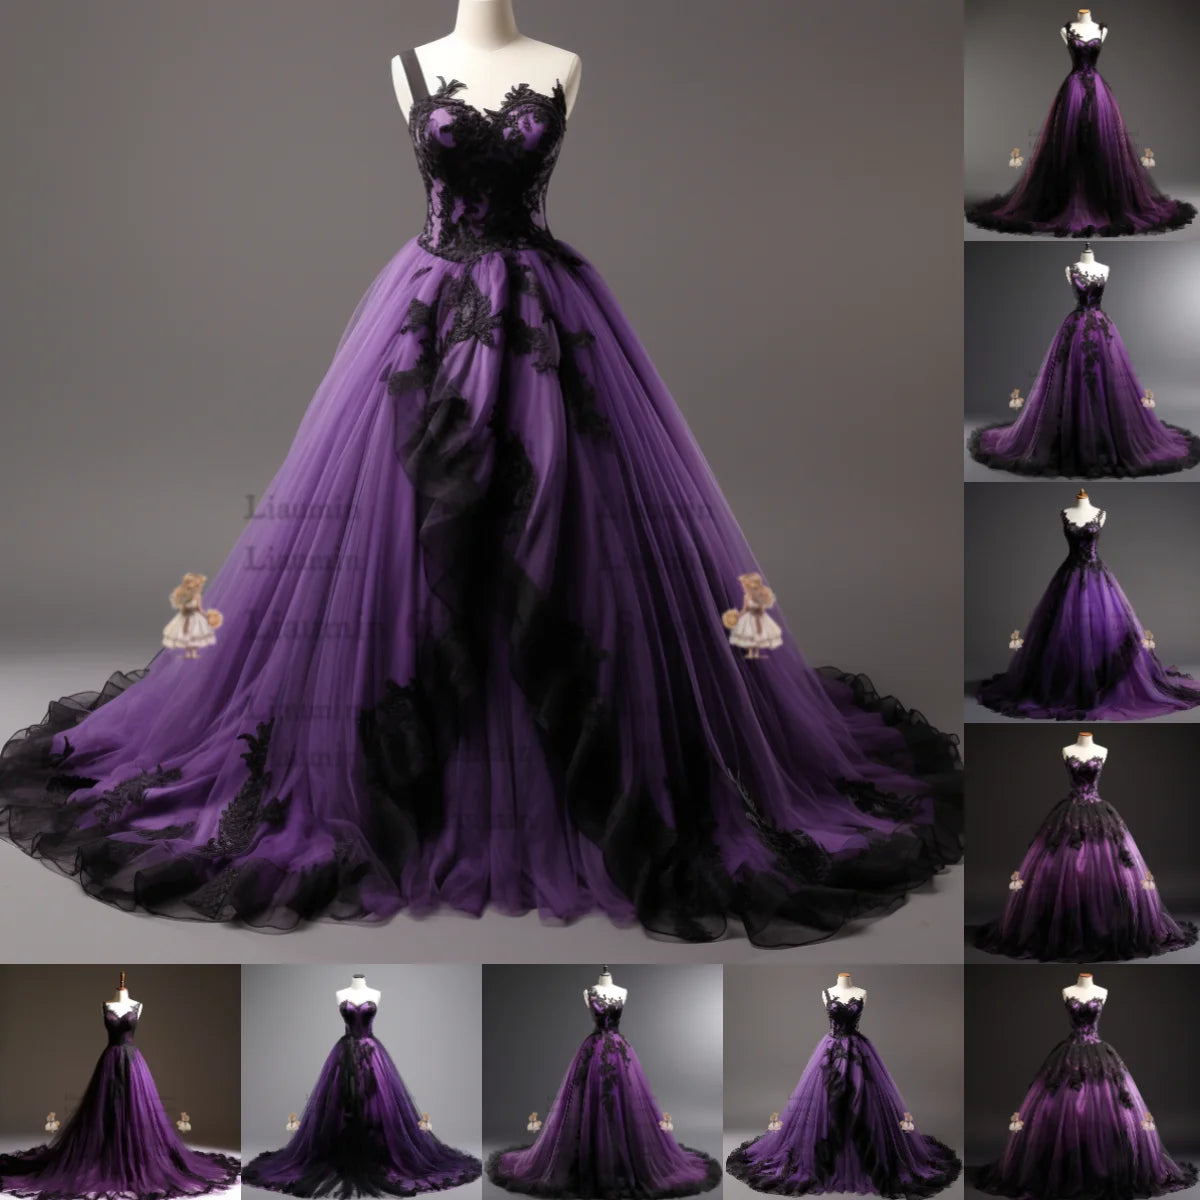 Purple and Black Lace Applique Strapless Ball Gown Full Length Evening Party Prom Dress Formal Occasion Hand Made Custom W2-3